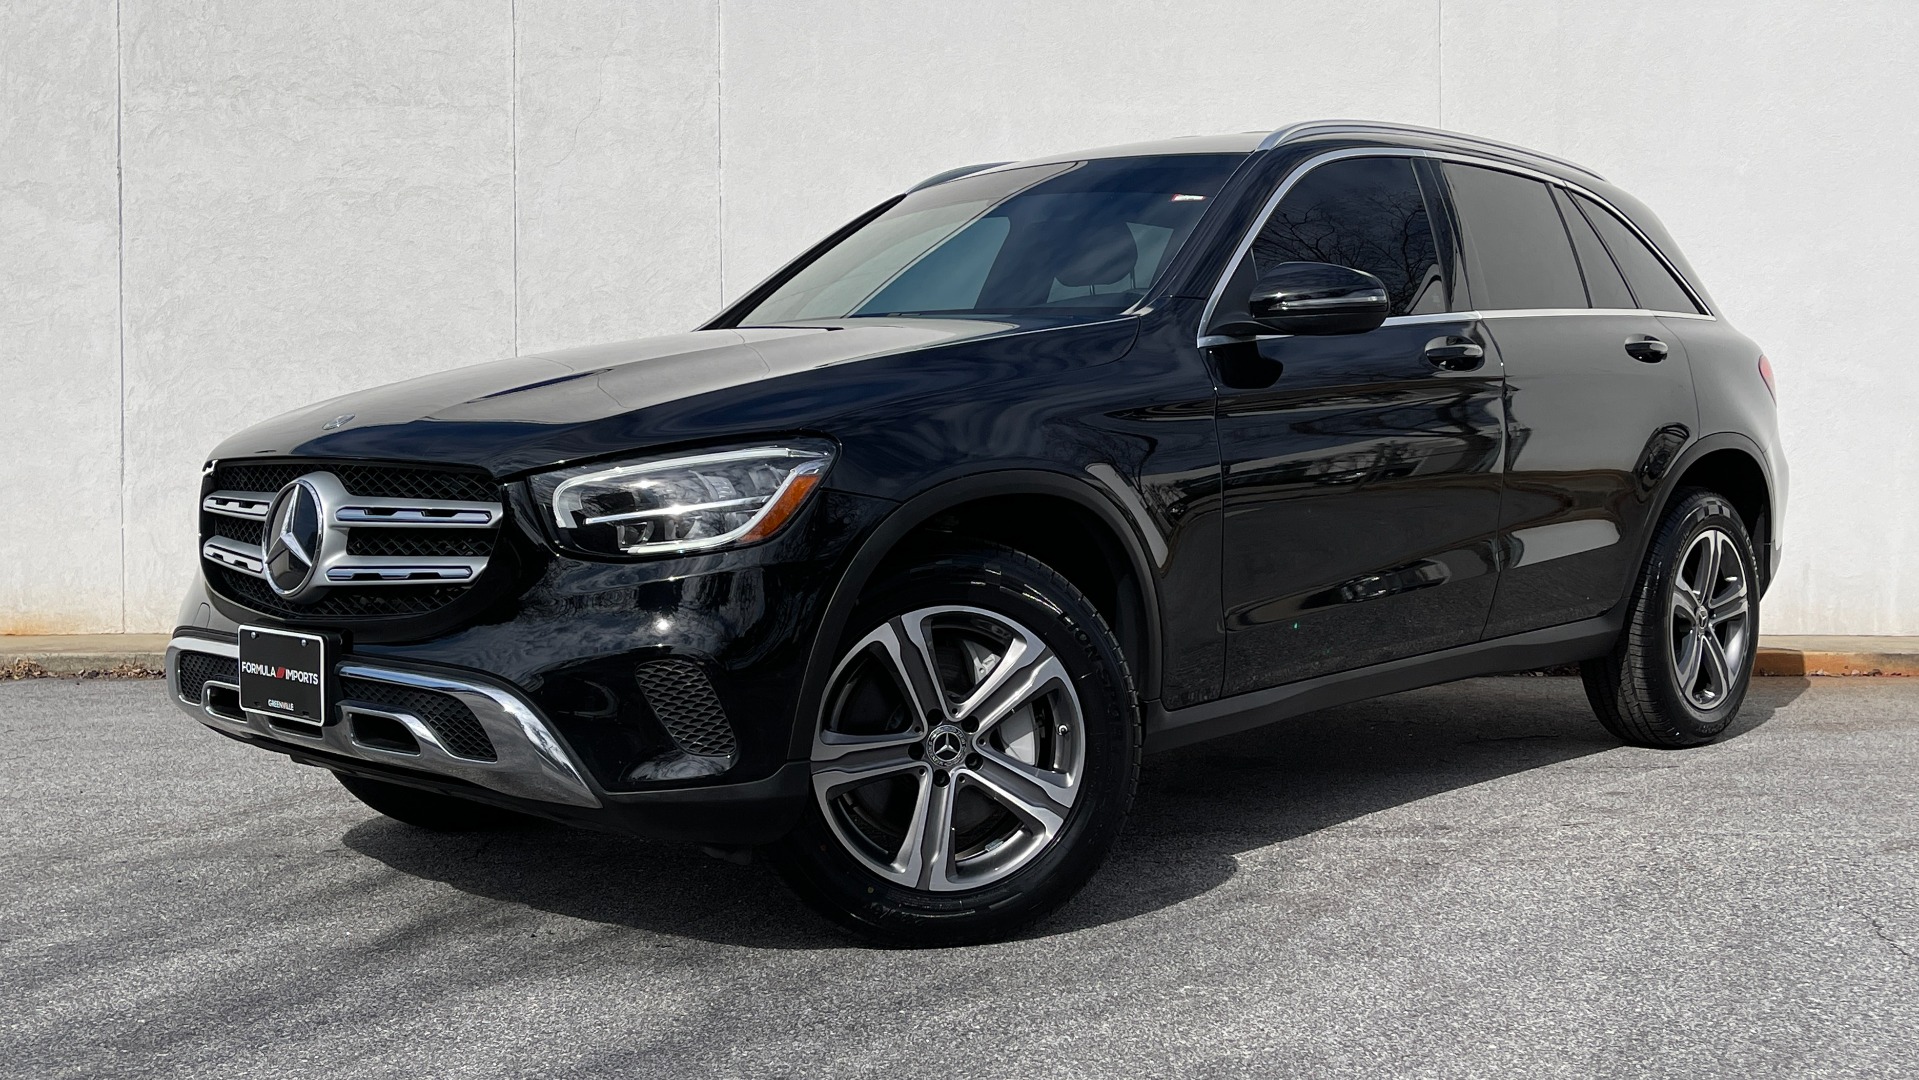 Used 2020 Mercedes-Benz GLC GLC 300 / AWD / 18IN WHEELS / LEATHER / WOOD TRIM for sale Sold at Formula Imports in Charlotte NC 28227 1